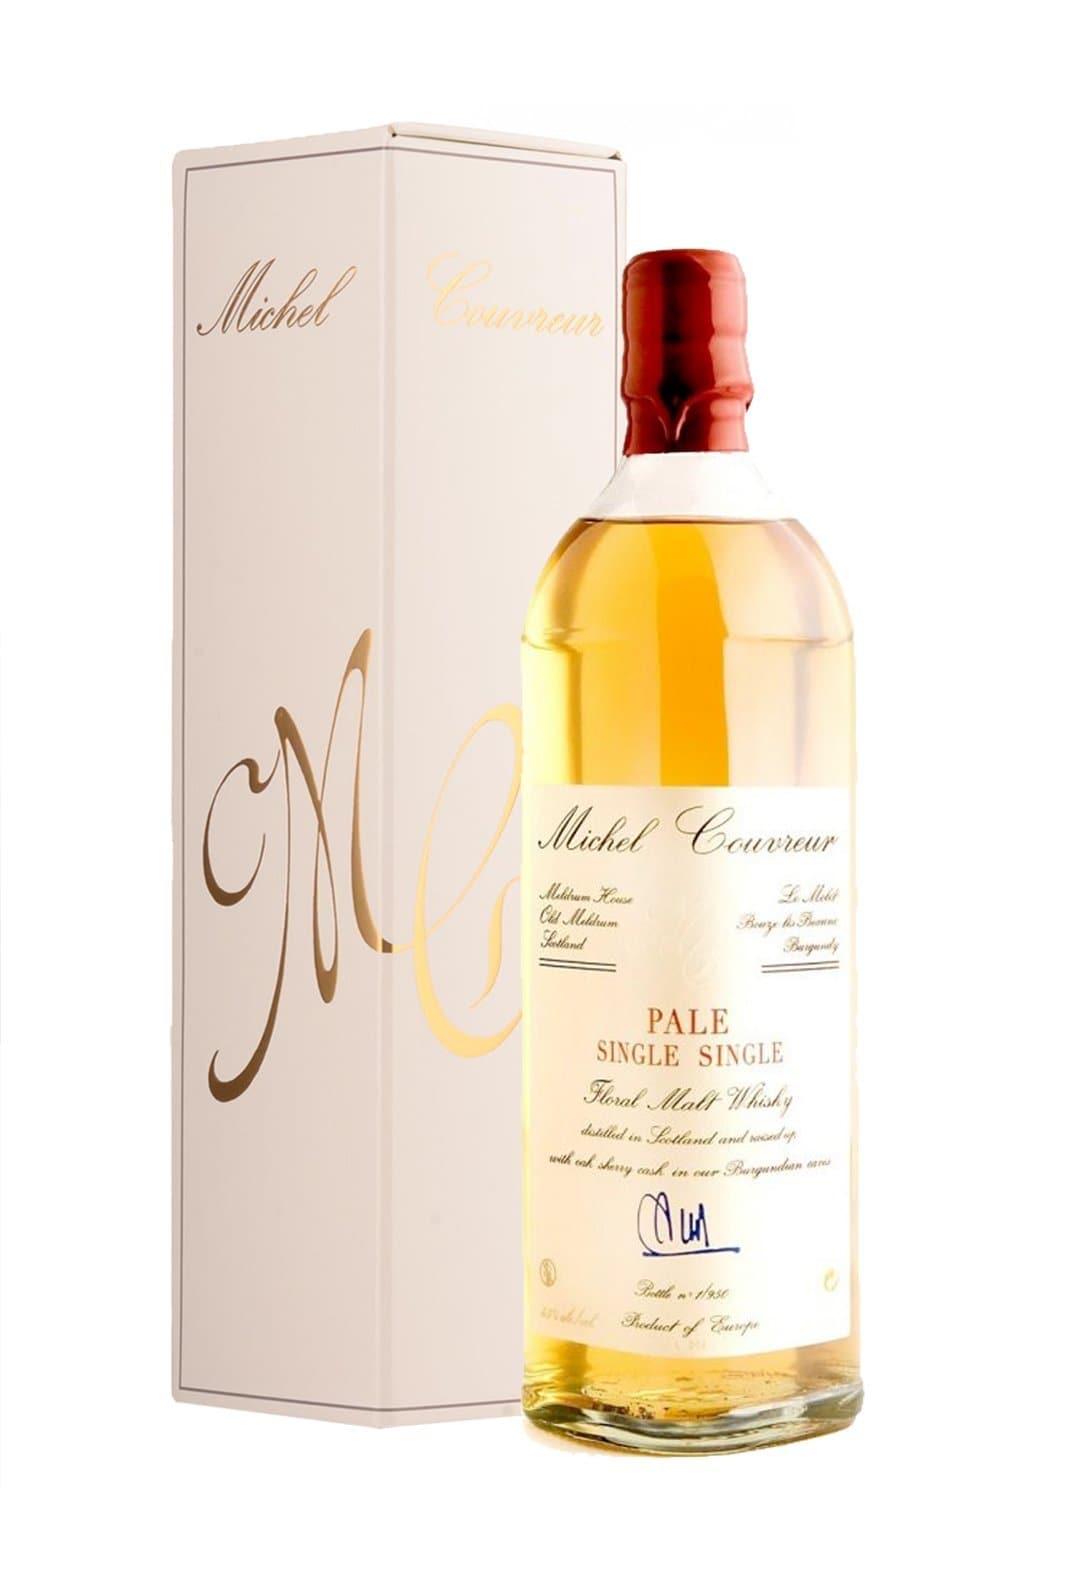 Michel Couvreur Whisky Pale Single Single 45% 700ml | Whiskey | Shop online at Spirits of France